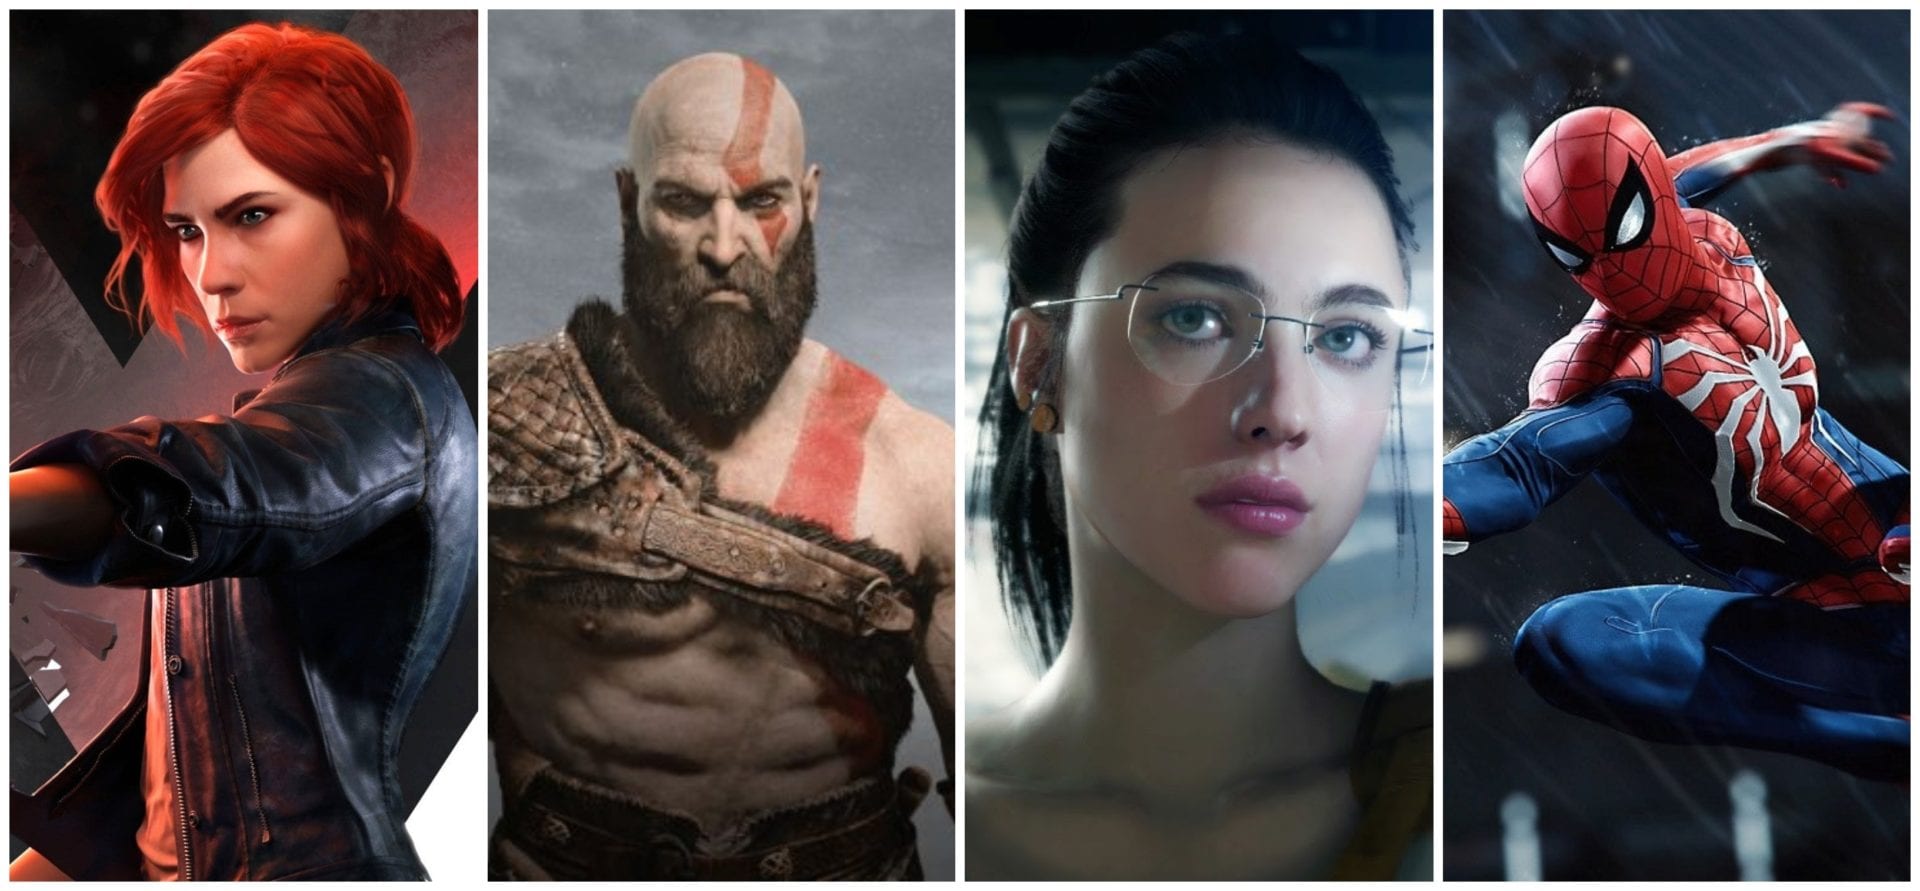 2018 vs 2019: Which Year Was Better for Games